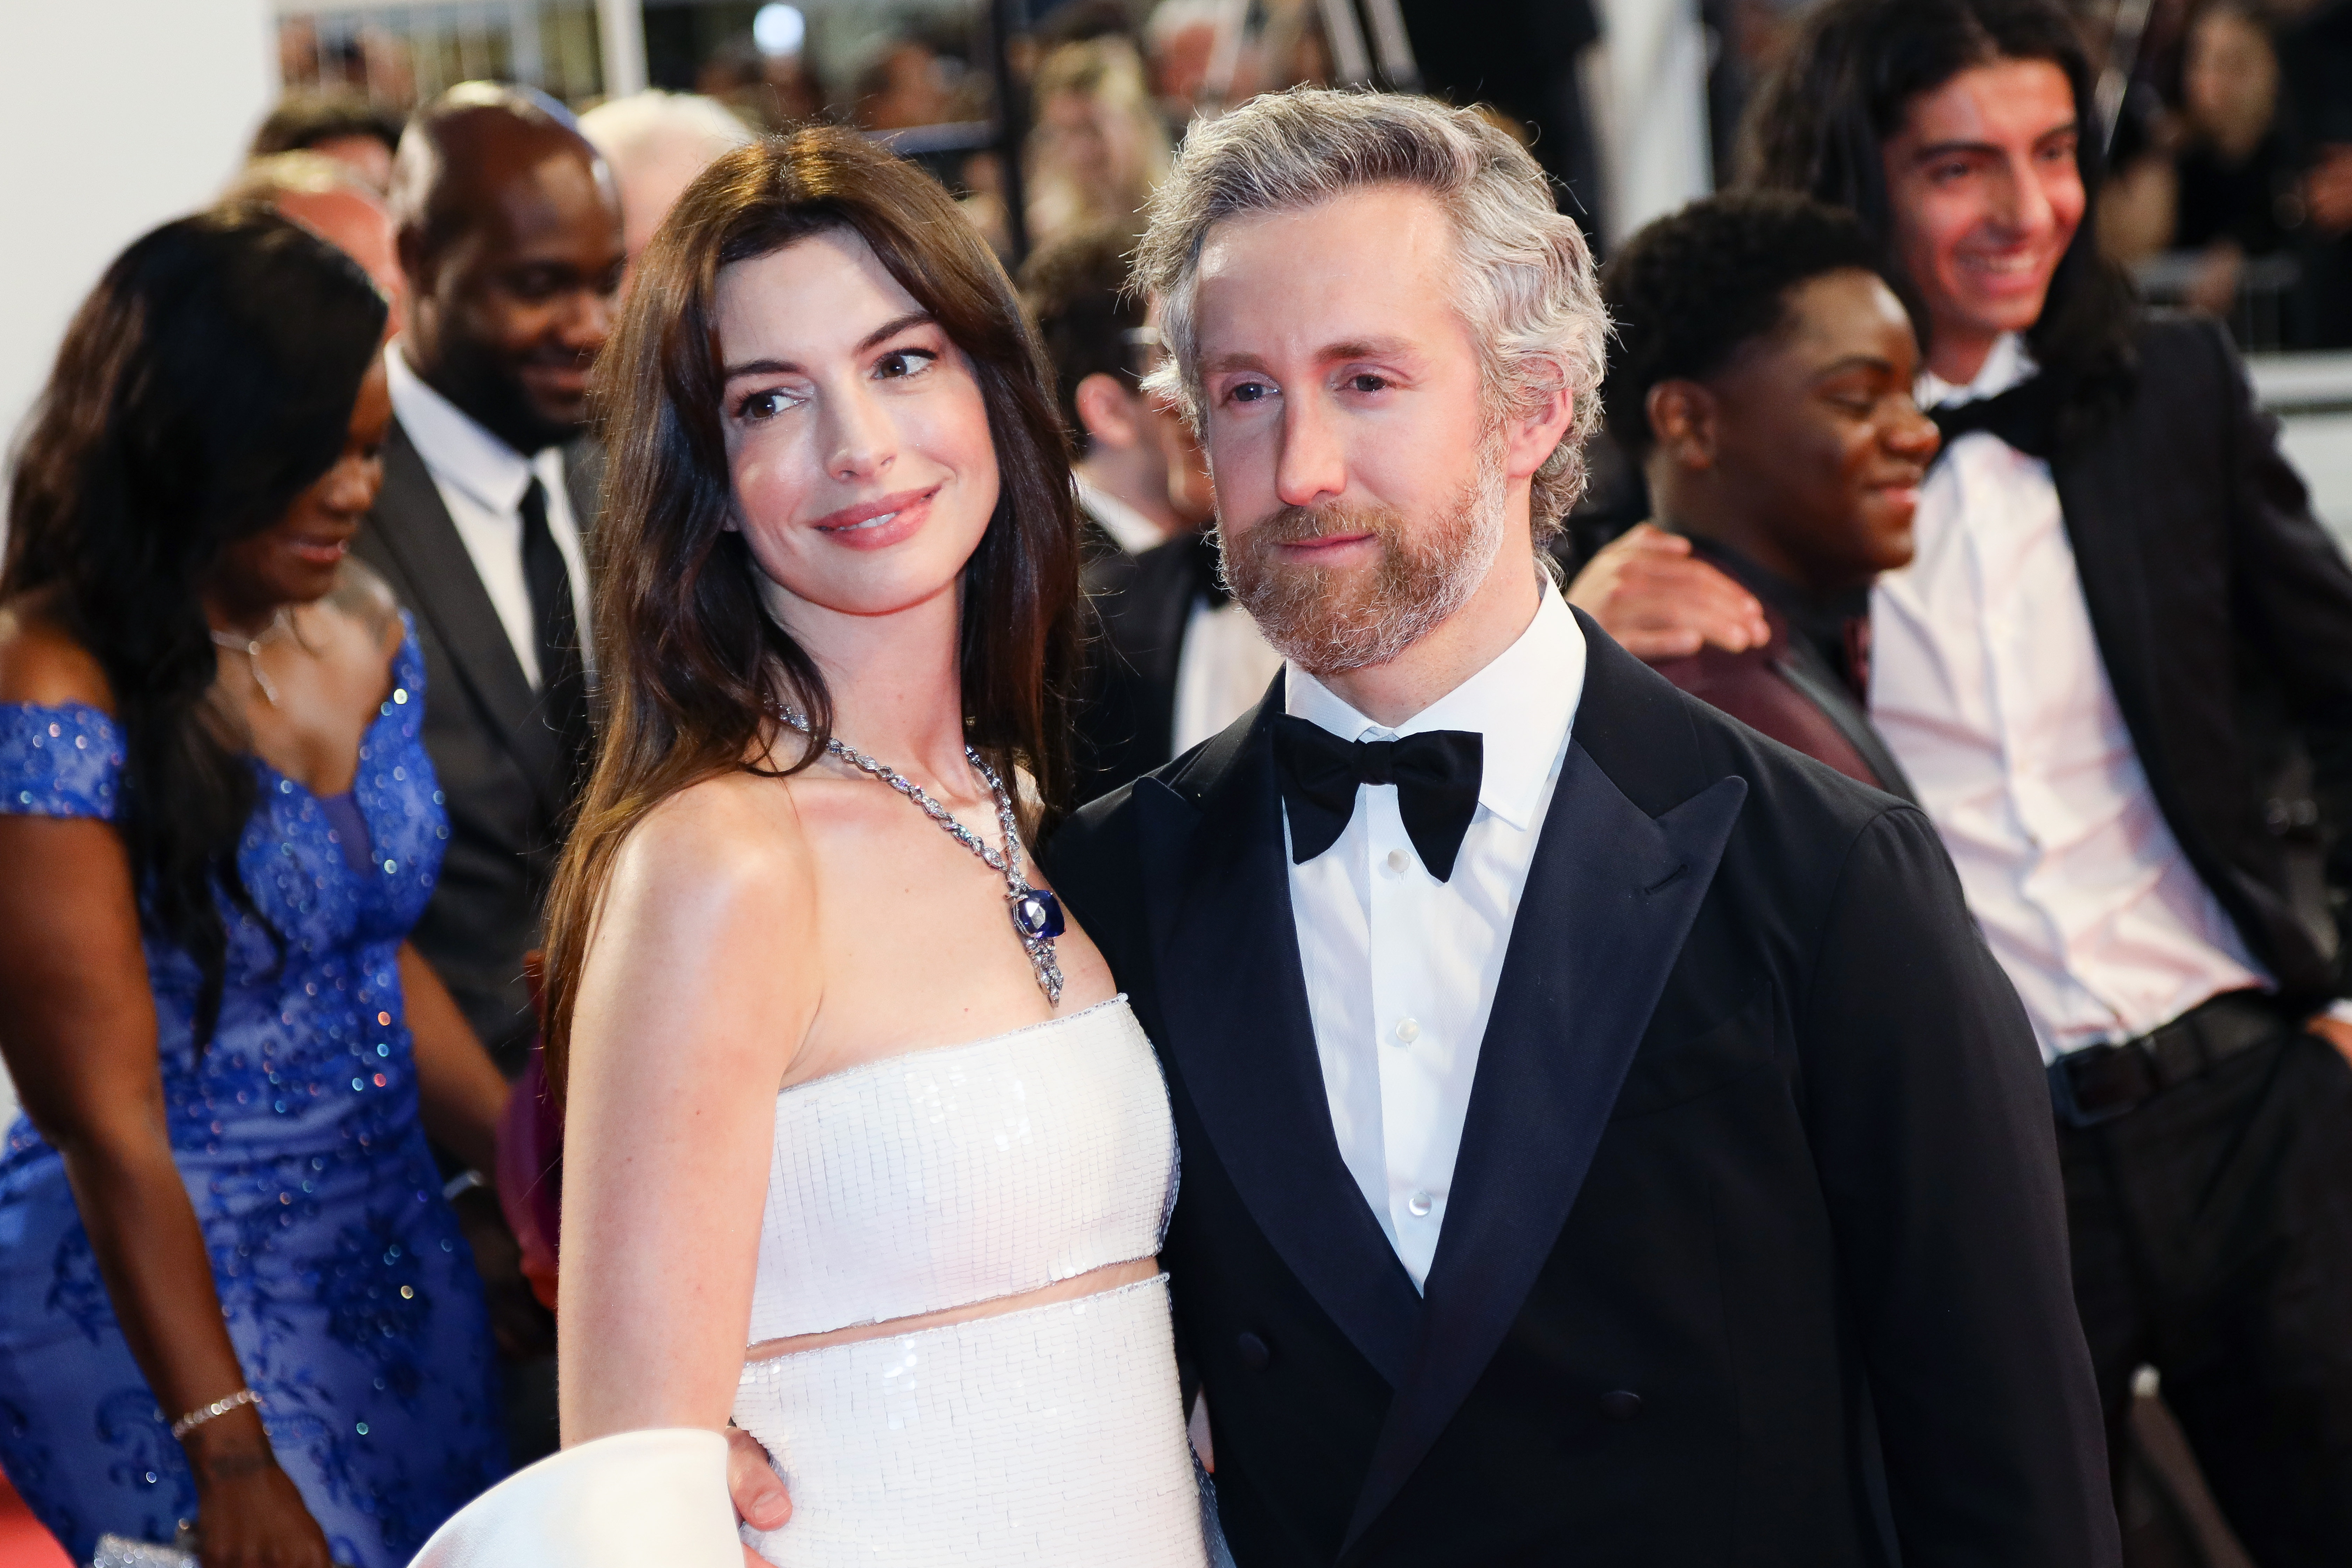 Adam Shulman and Anne Hathaway in Cannes, France on May 19, 2022 | Source: Getty Images